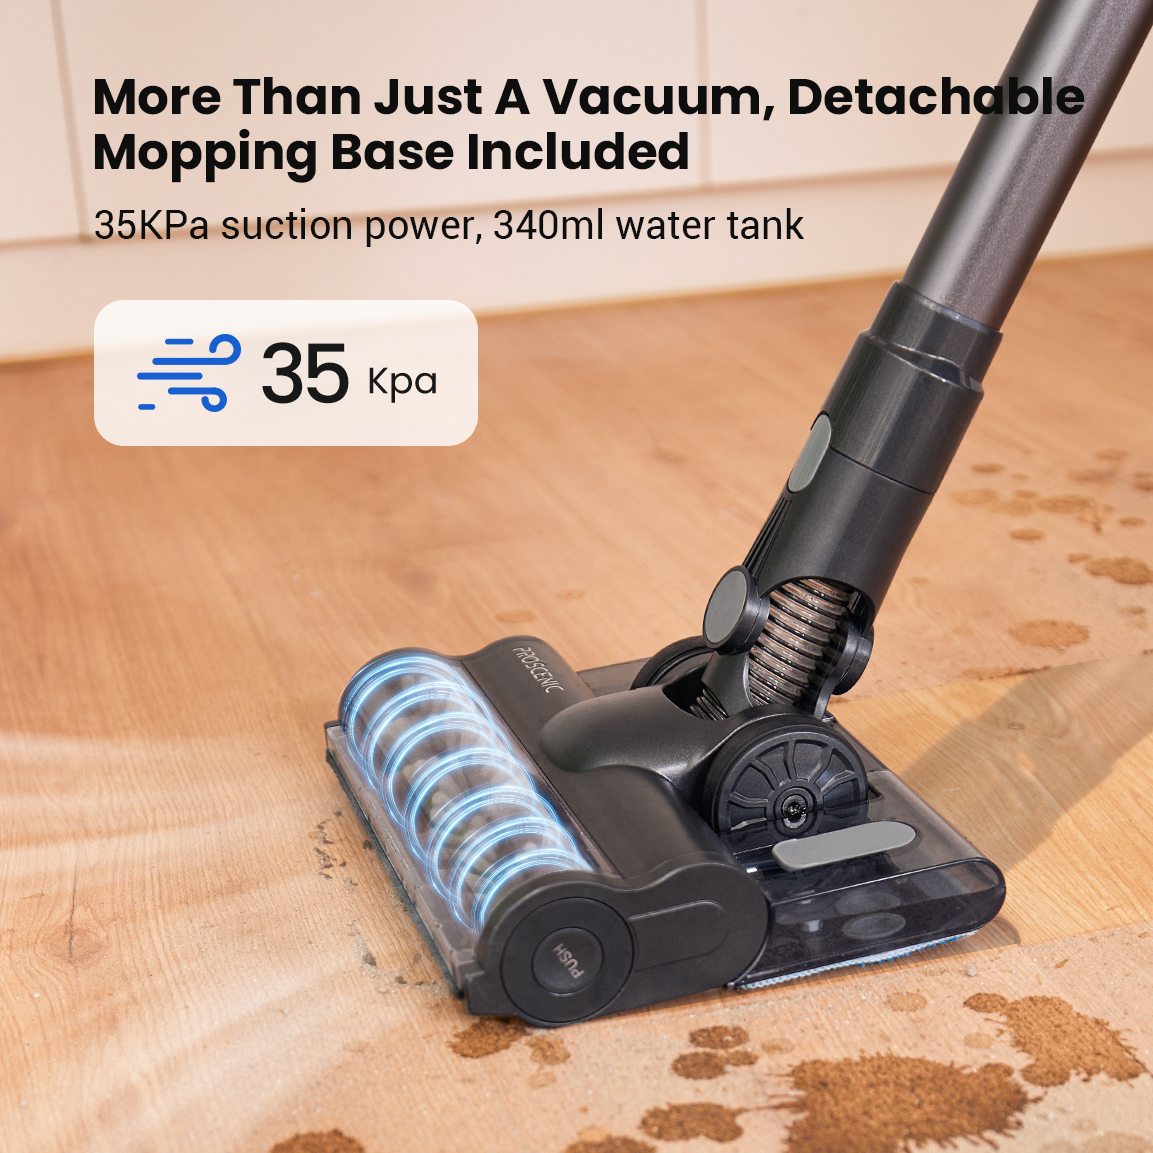 Review: Proscenic launches the P11 Mopping 2-in-1 vacuum cleaner